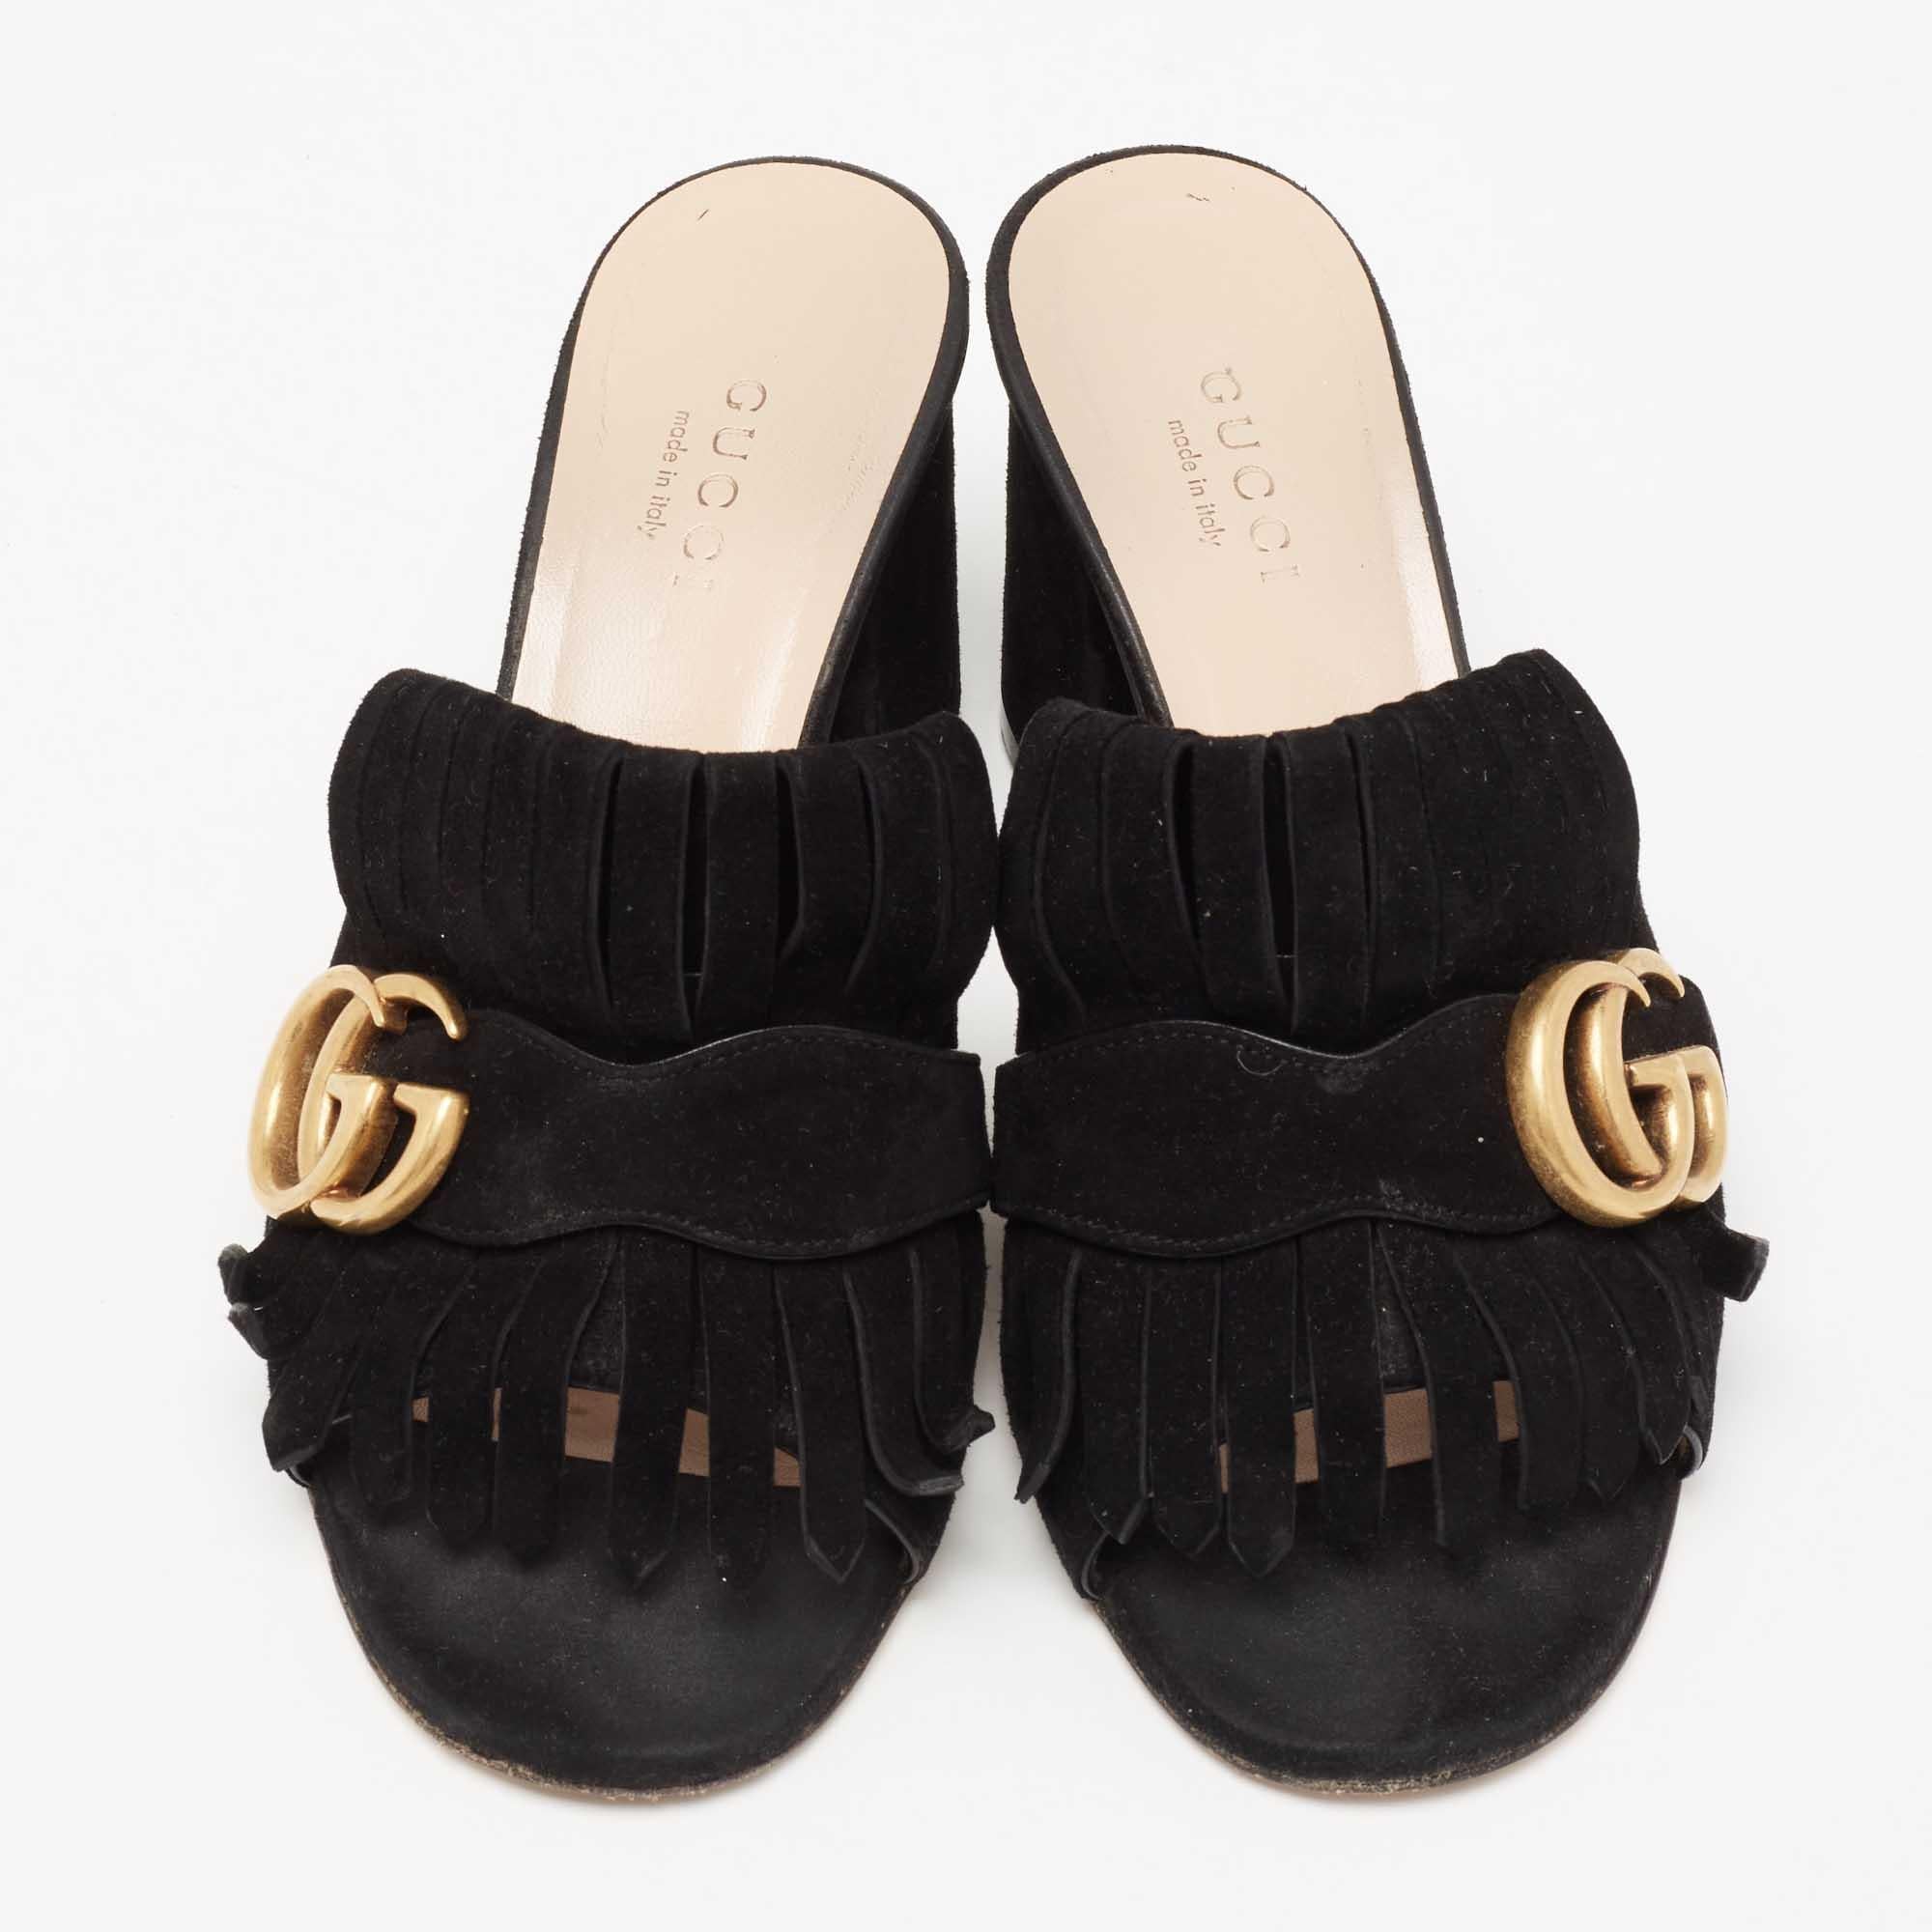 Gucci presents us with an impeccable creation that will make your style stand out. These GG Marmont mules from Gucci are crafted using suede with fringed detailing and a gold-toned GG motif attached to the vamps. They are completed with open-toes